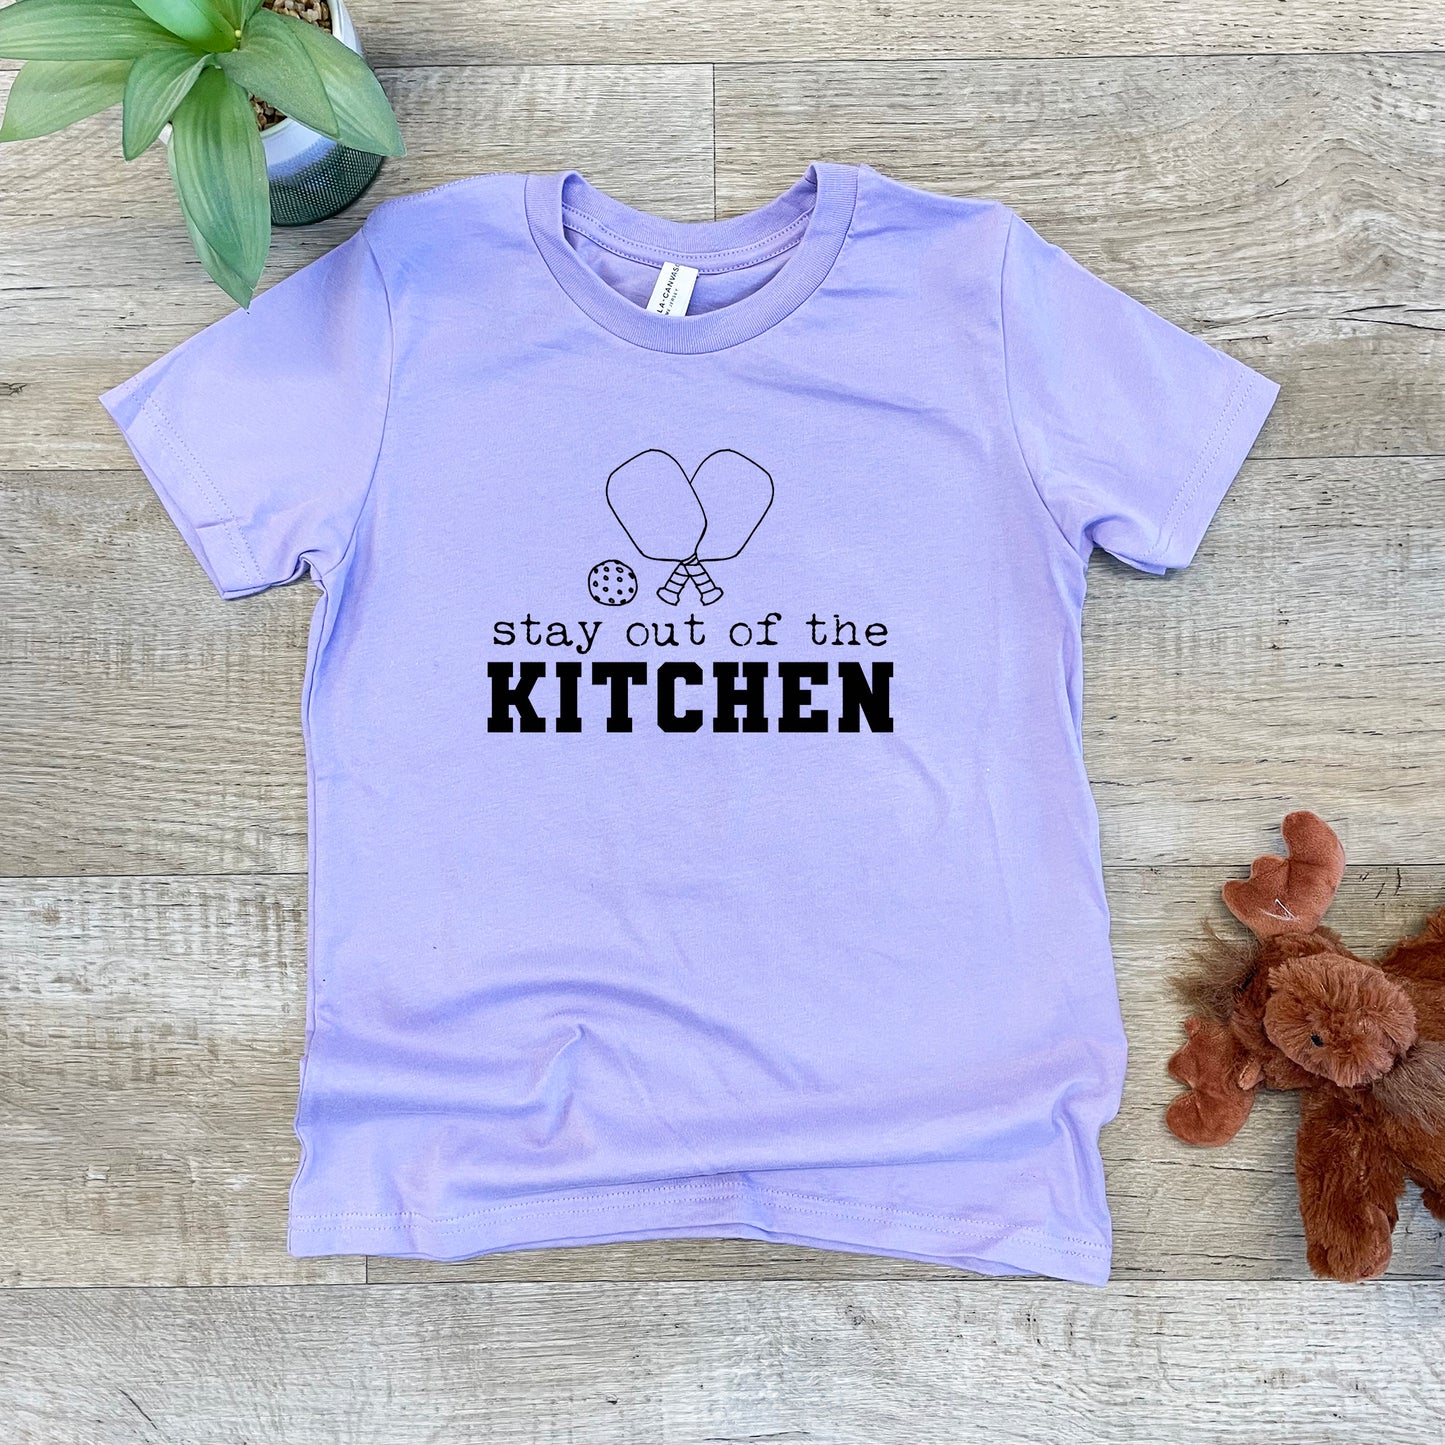 a t - shirt that says stay out of the kitchen next to a teddy bear